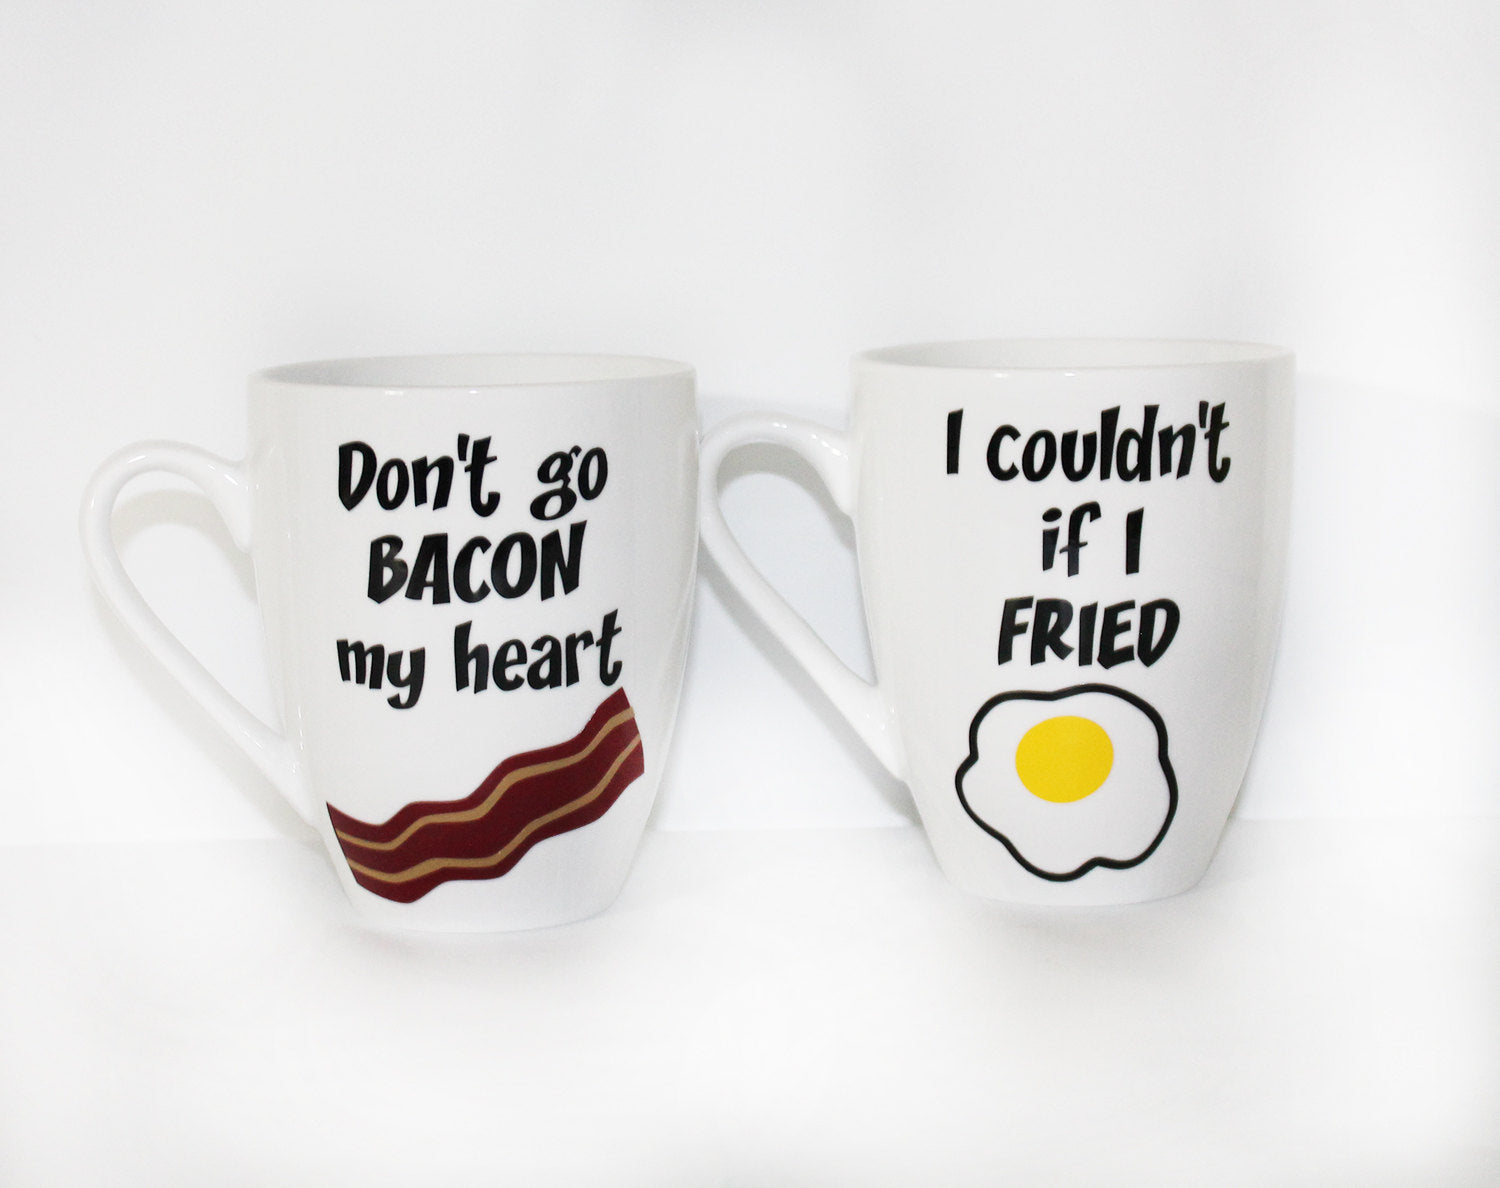 Don't go Bacon my Heart - I couldn't if I fried - Quote - Unisex - Bacon and Eggs Personalized Breakfast Ceramic Mug Set - Gift - Valentine